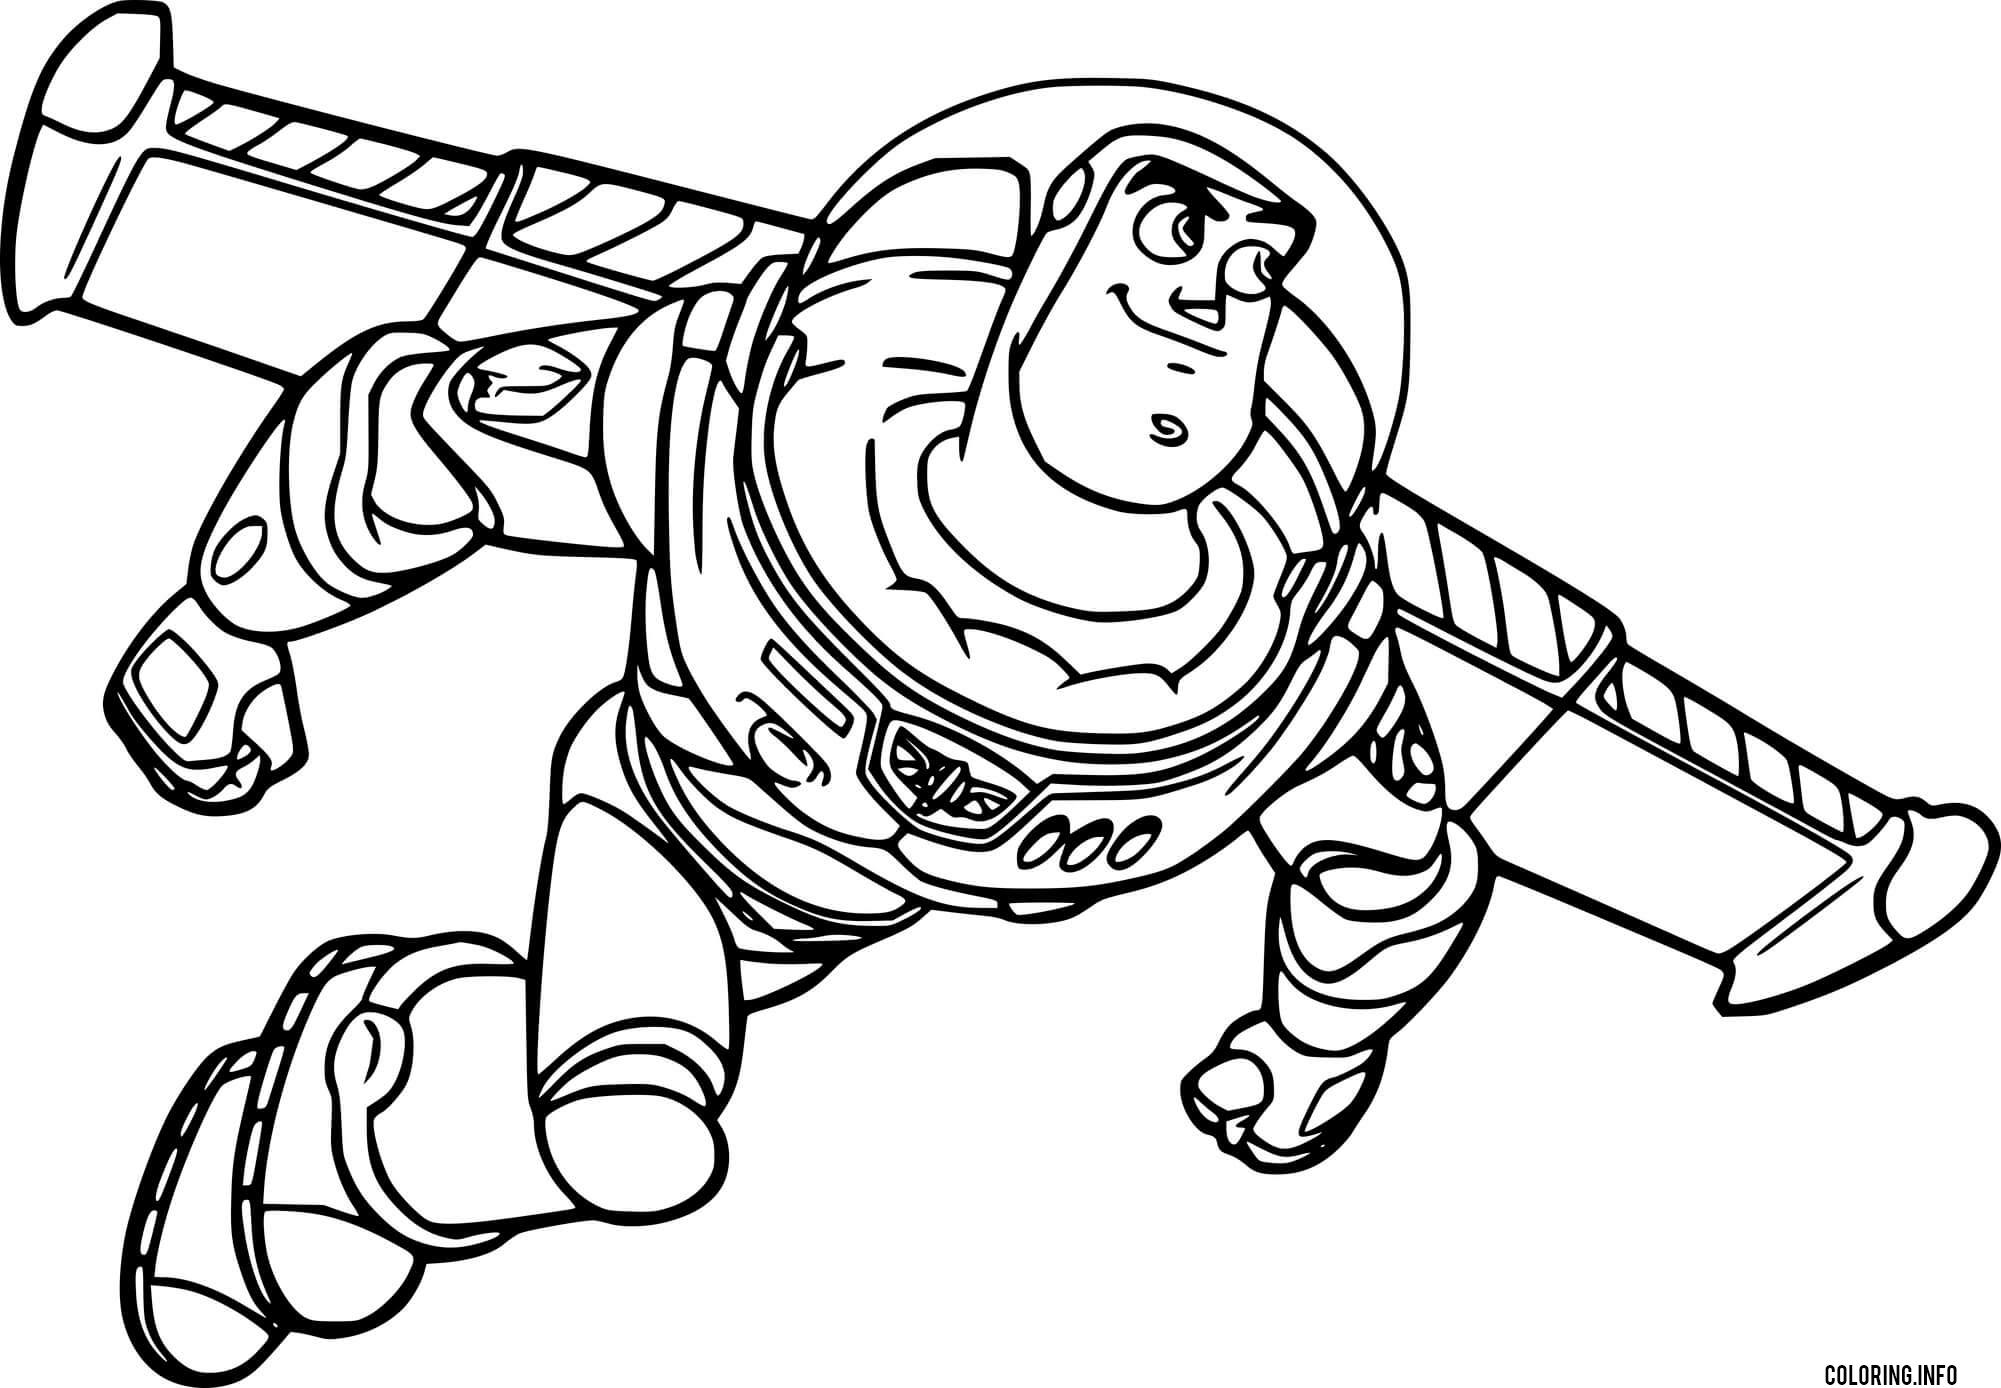 Buzz Lightyear Takes Off coloring